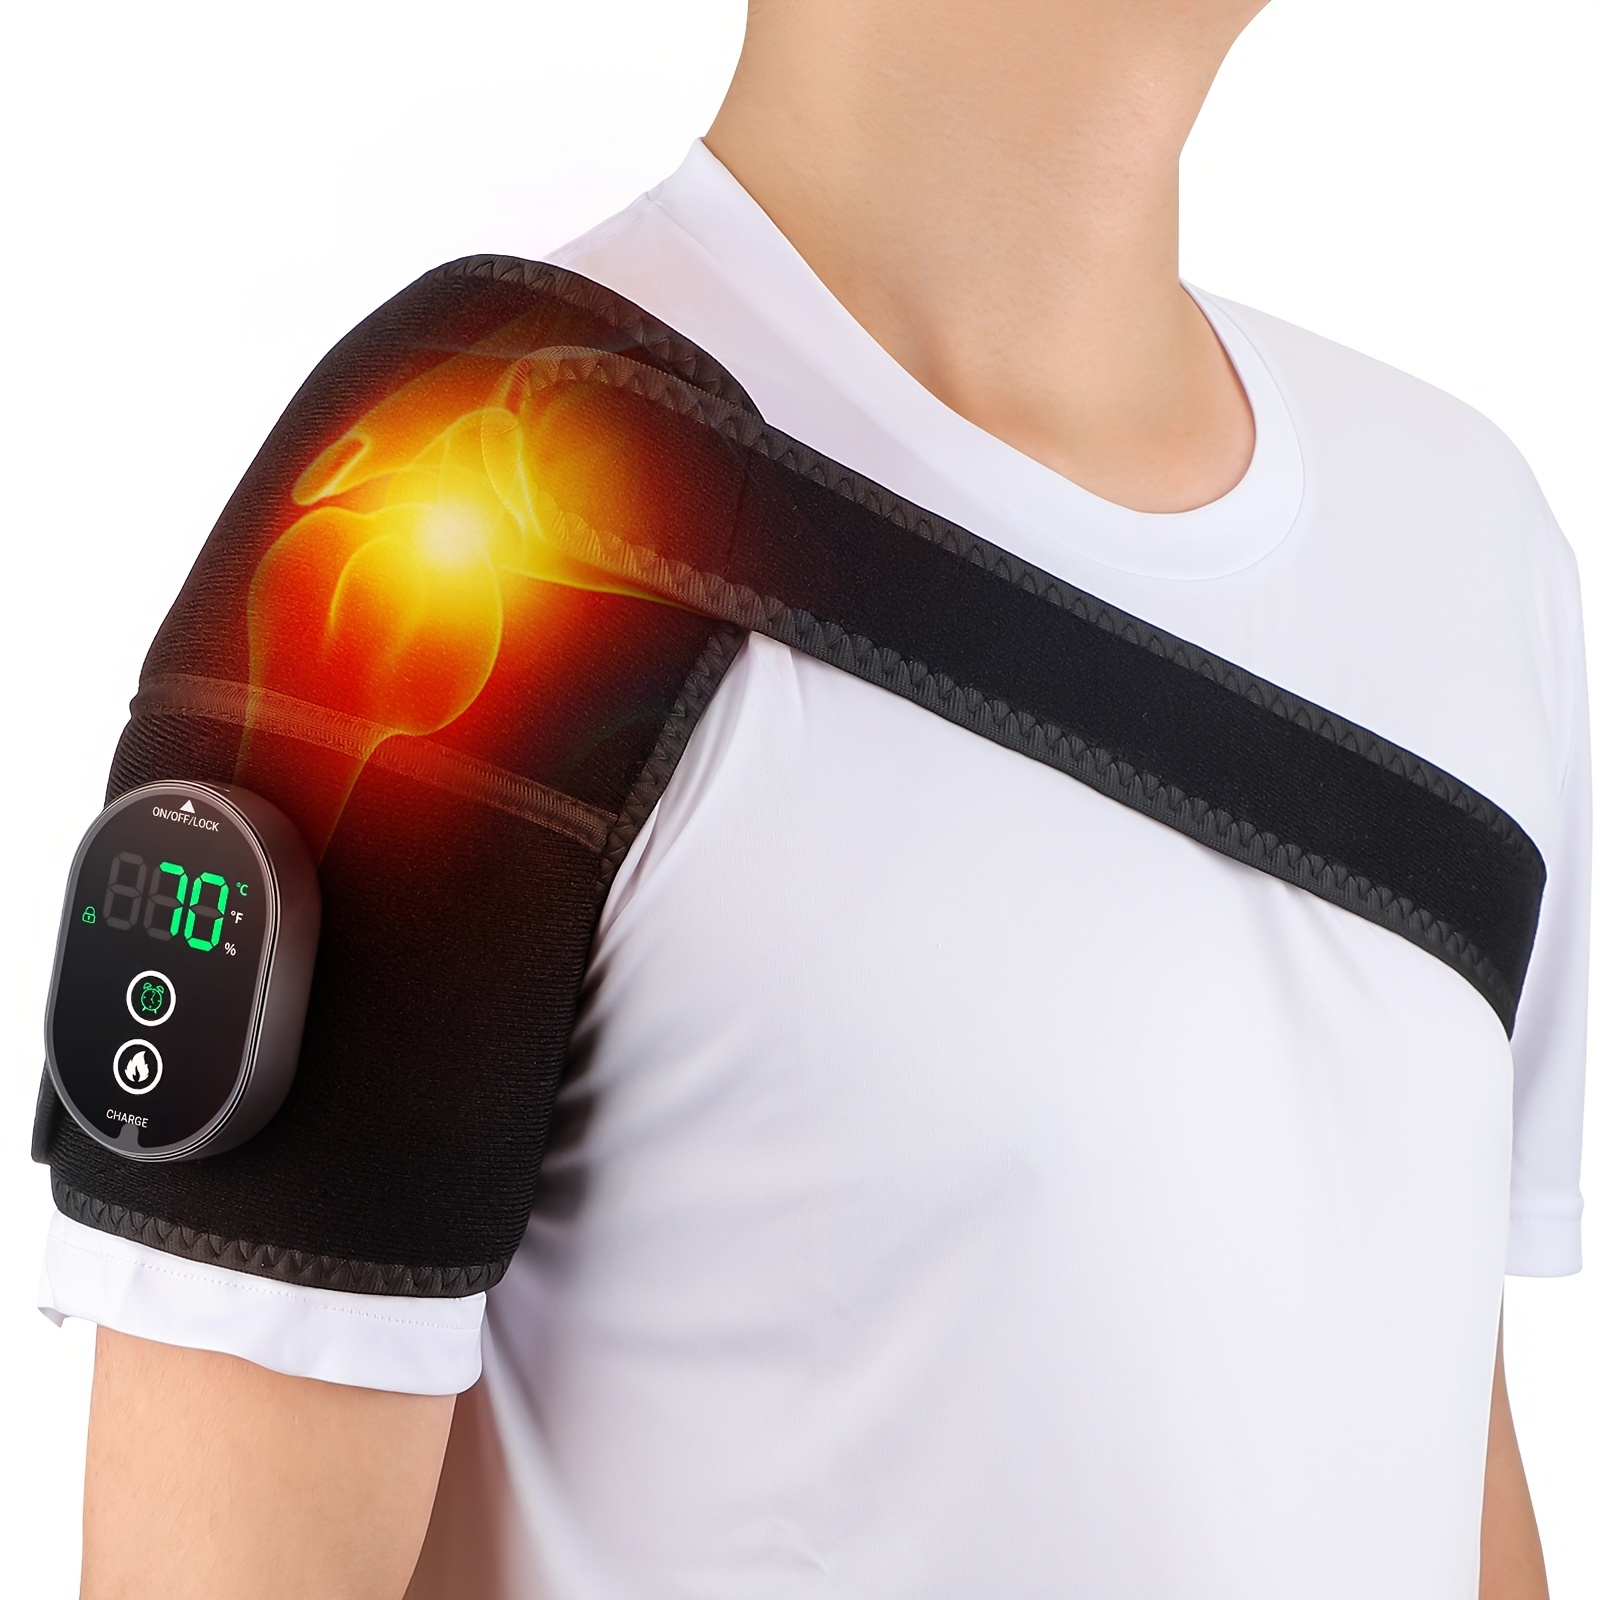 Electric Heating Pad for Shoulder Support for Dislocated Shoulder  Rehabilitation Injury Pain Relief Adjustable Shoulder Wrap